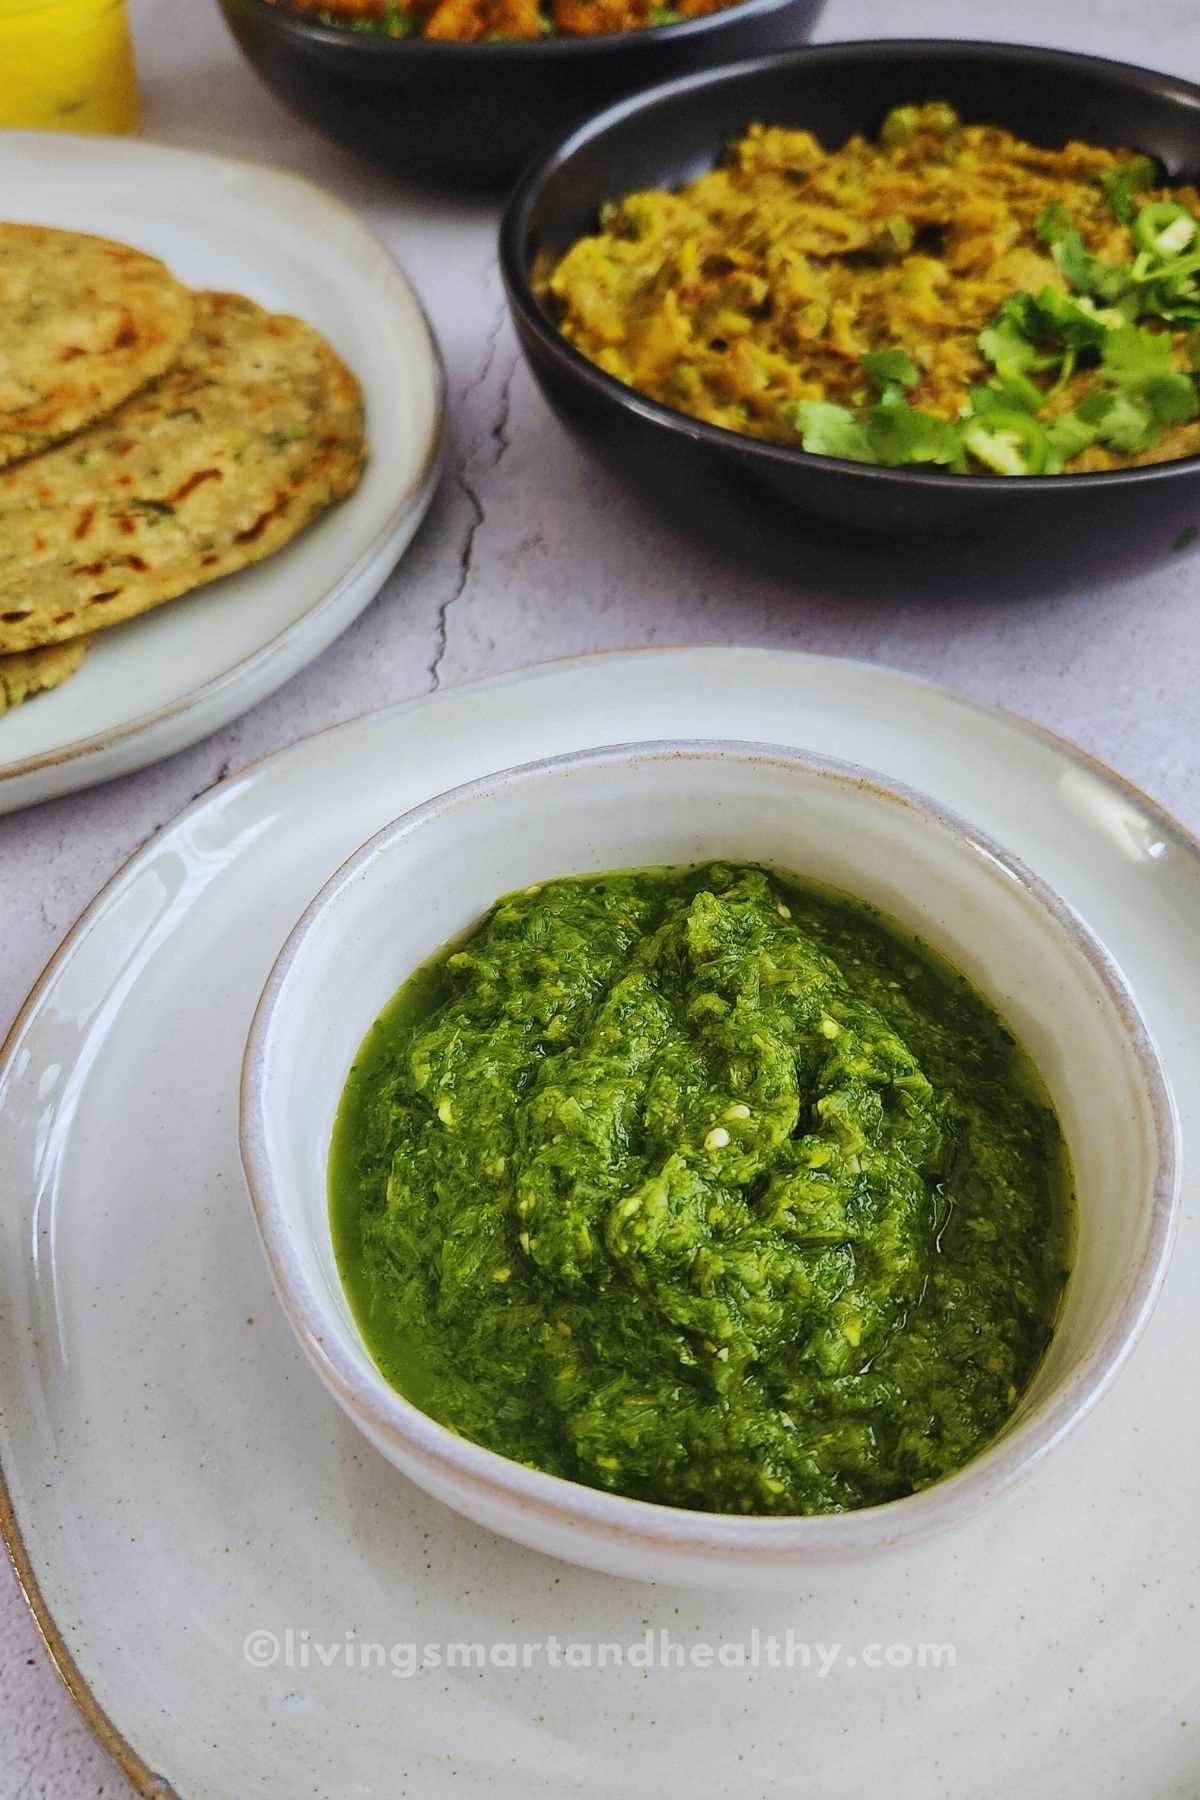 green chutney for chaat